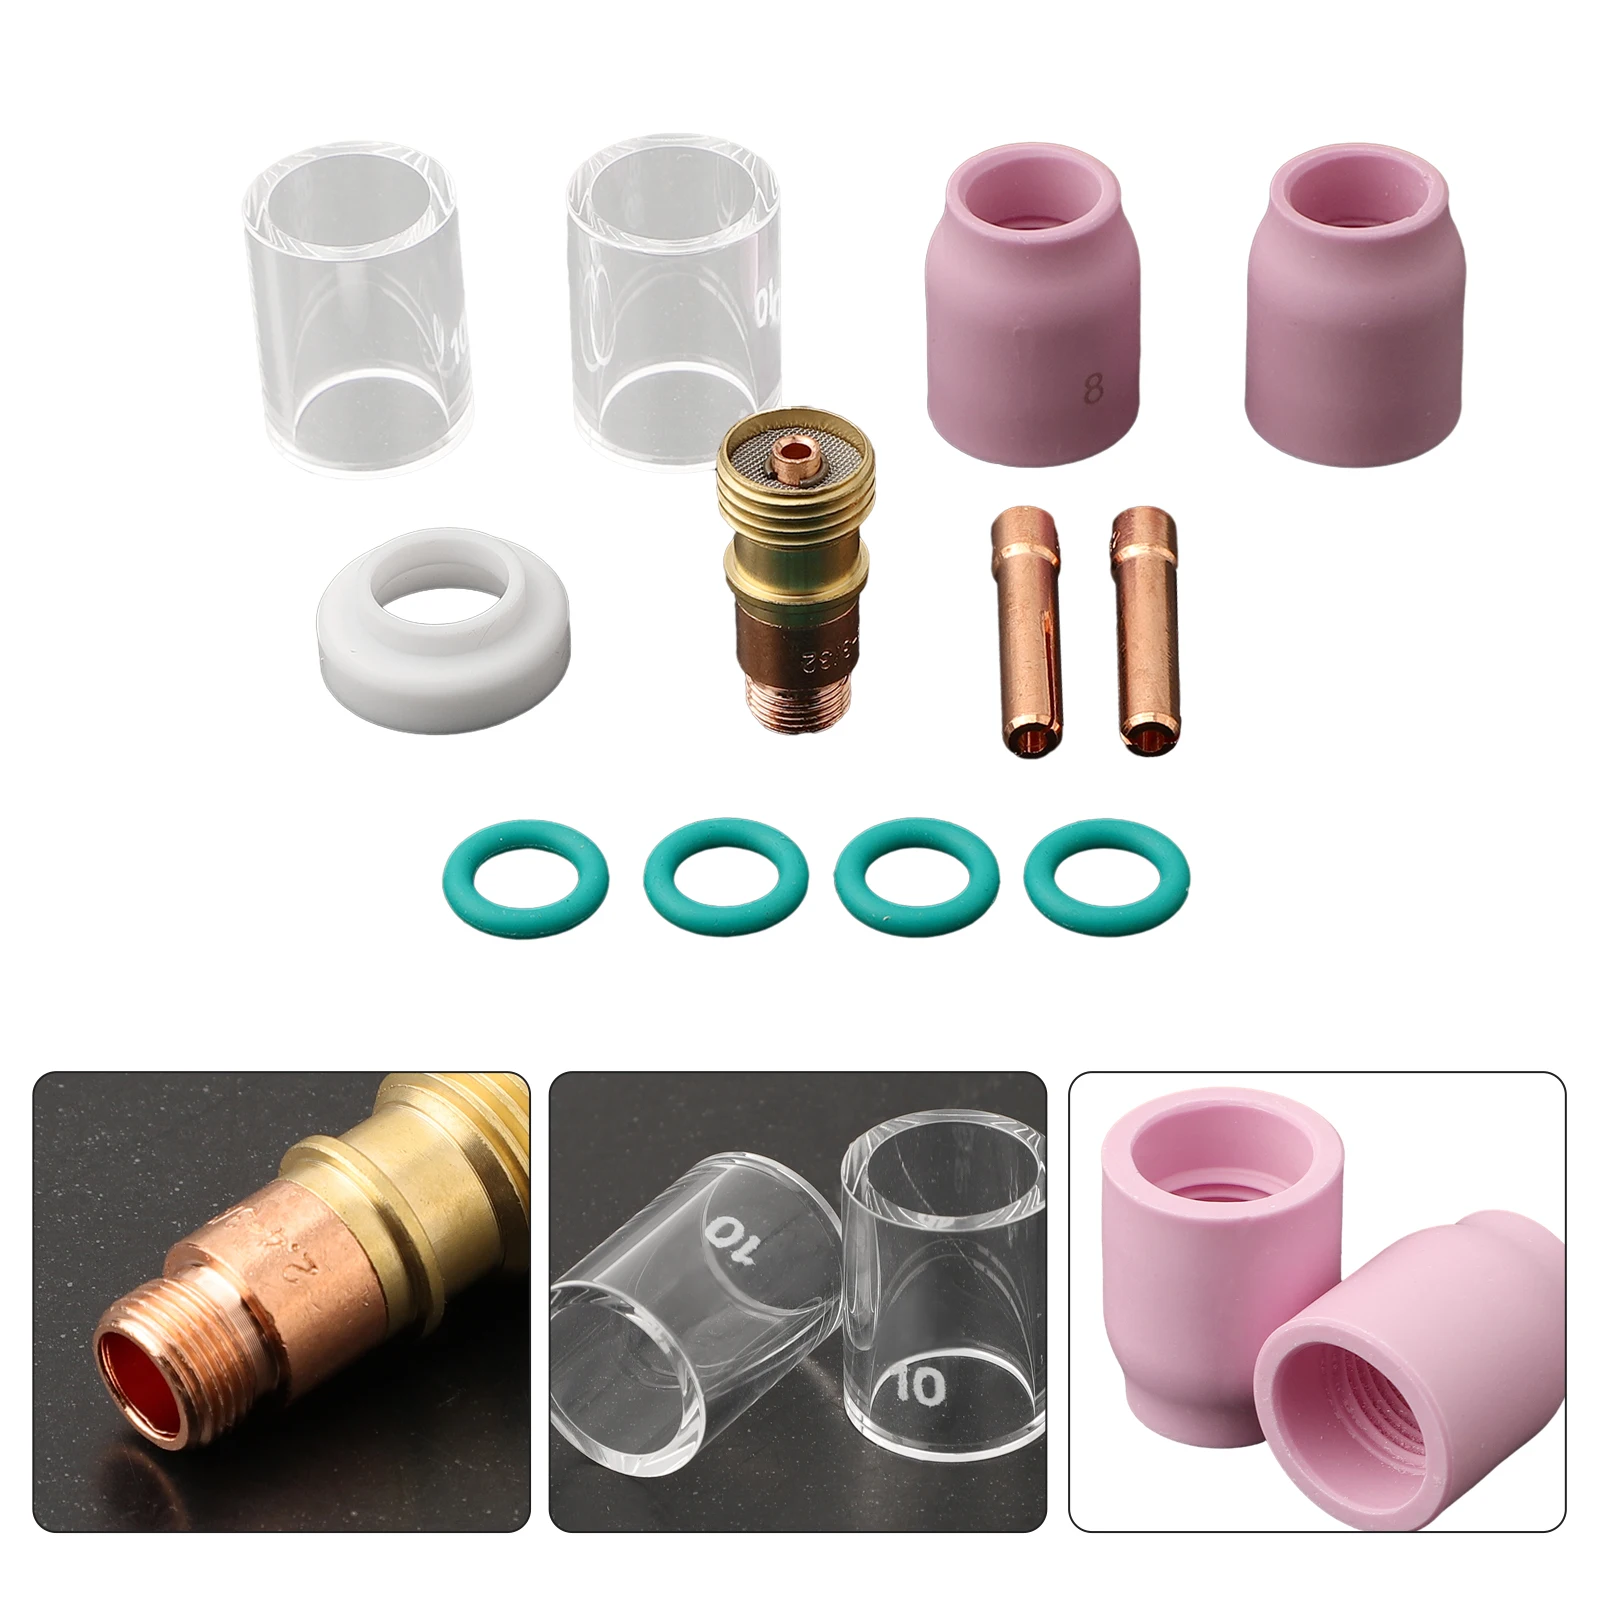 

Precision Welding Made Easy 10 Heat Glass Cup Kit for WP171826 12pcs Stubby Gas Lens Compatible with TIG Welding Torch